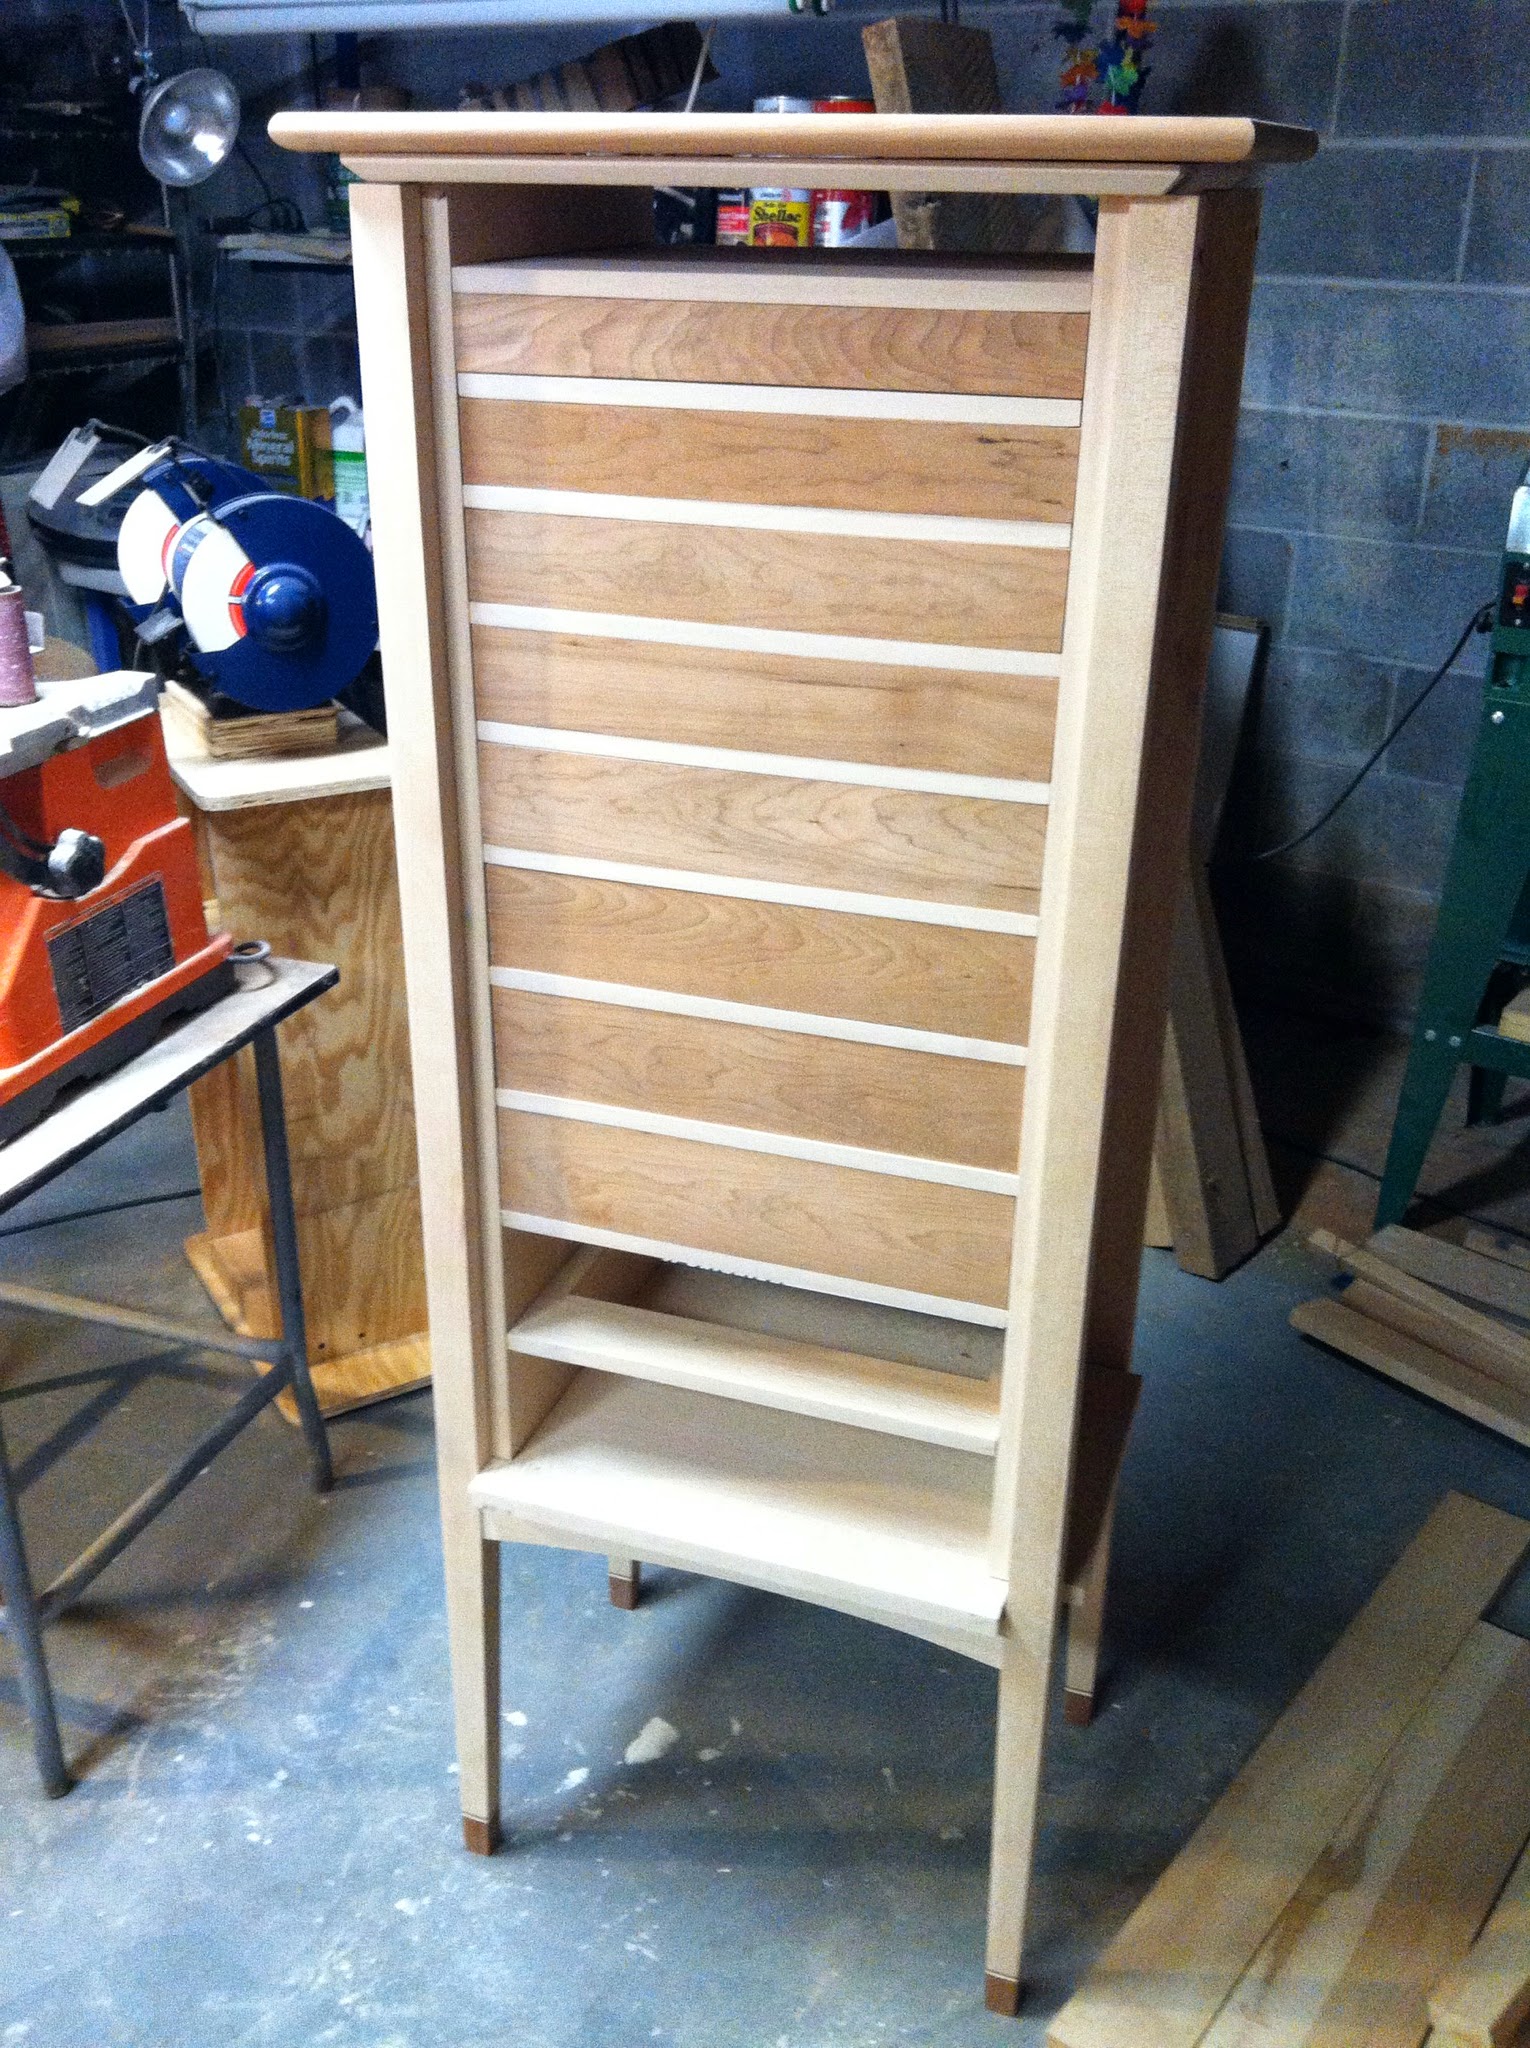 Front view as of April 7, 2014 - eight drawers done